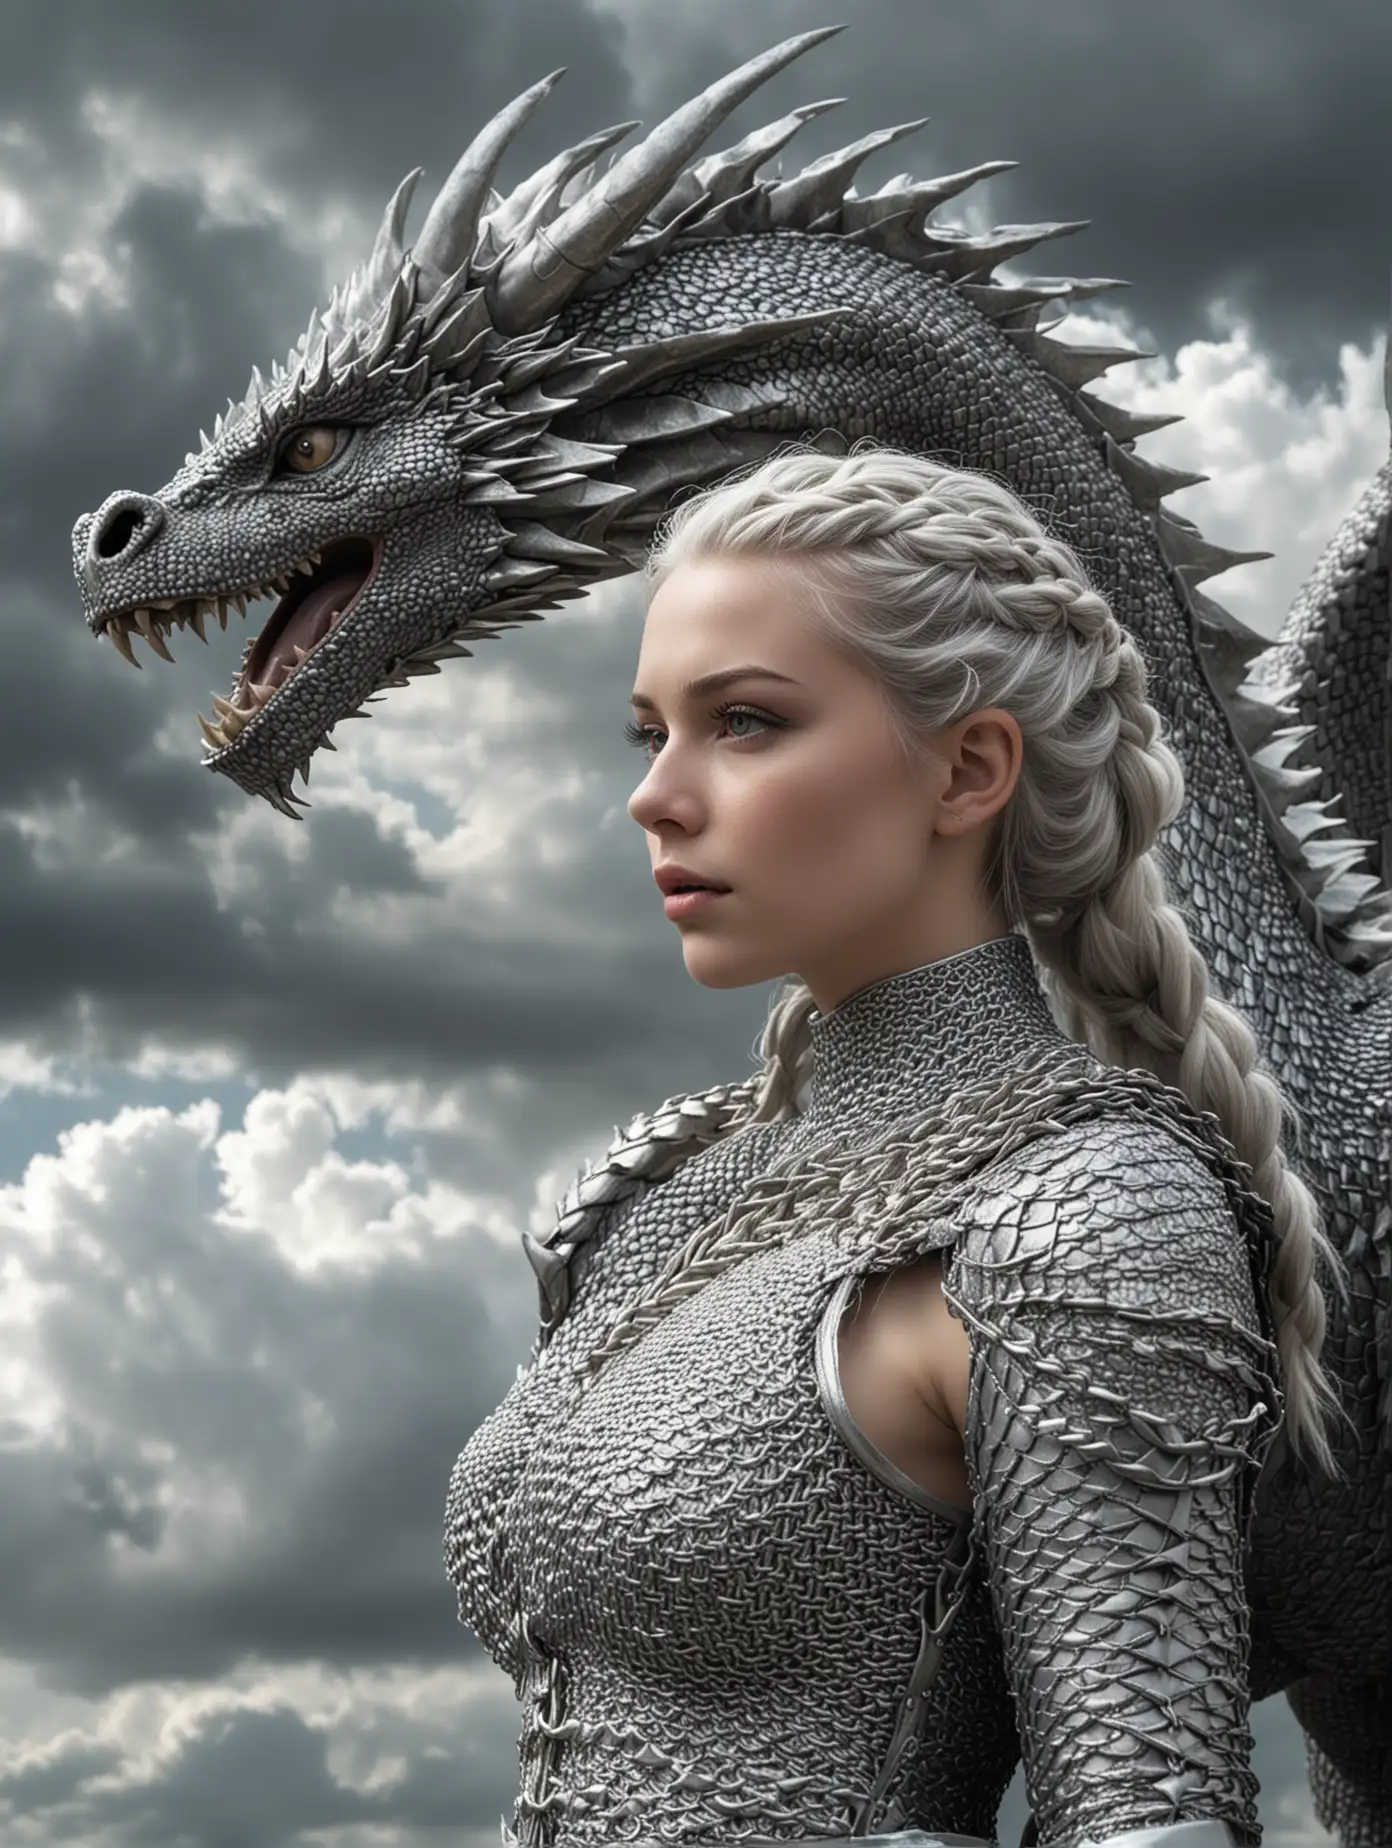 SilverHaired Woman in Chainmail Riding Giant Dragon in Fantasy Sky